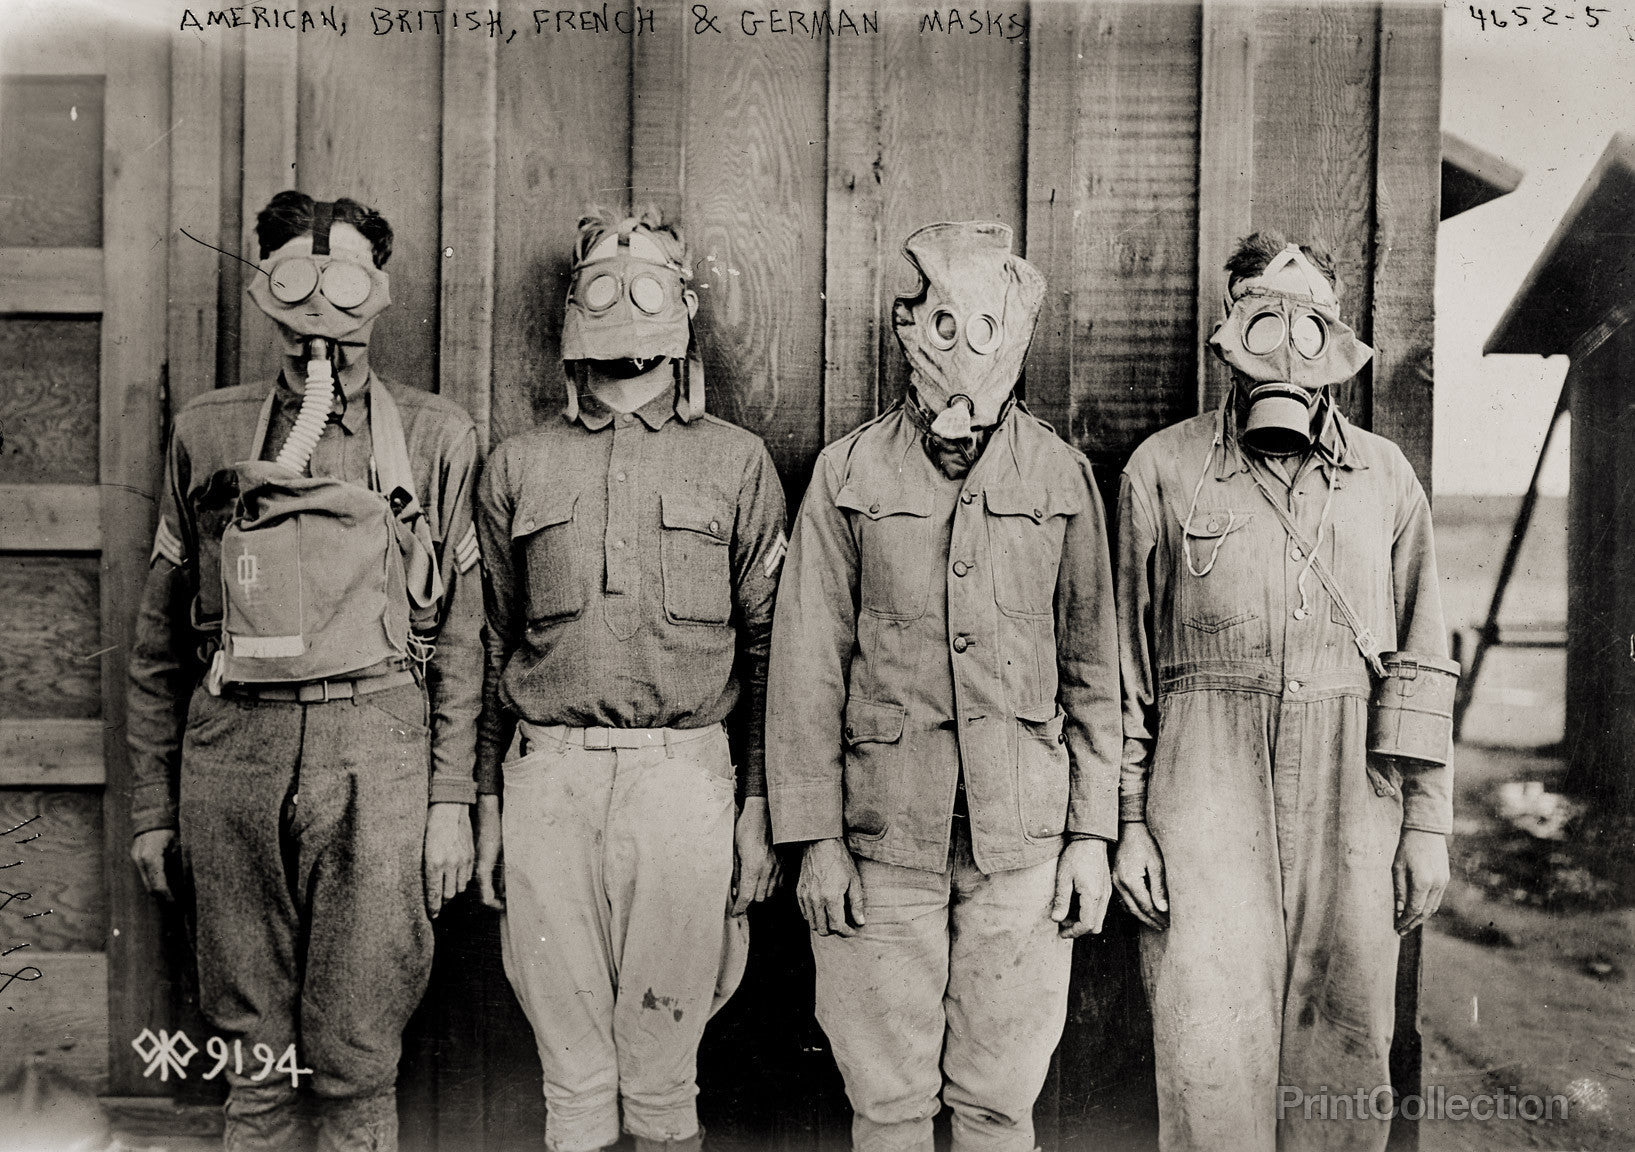 Print Collection - American, British, French & German Gas Masks